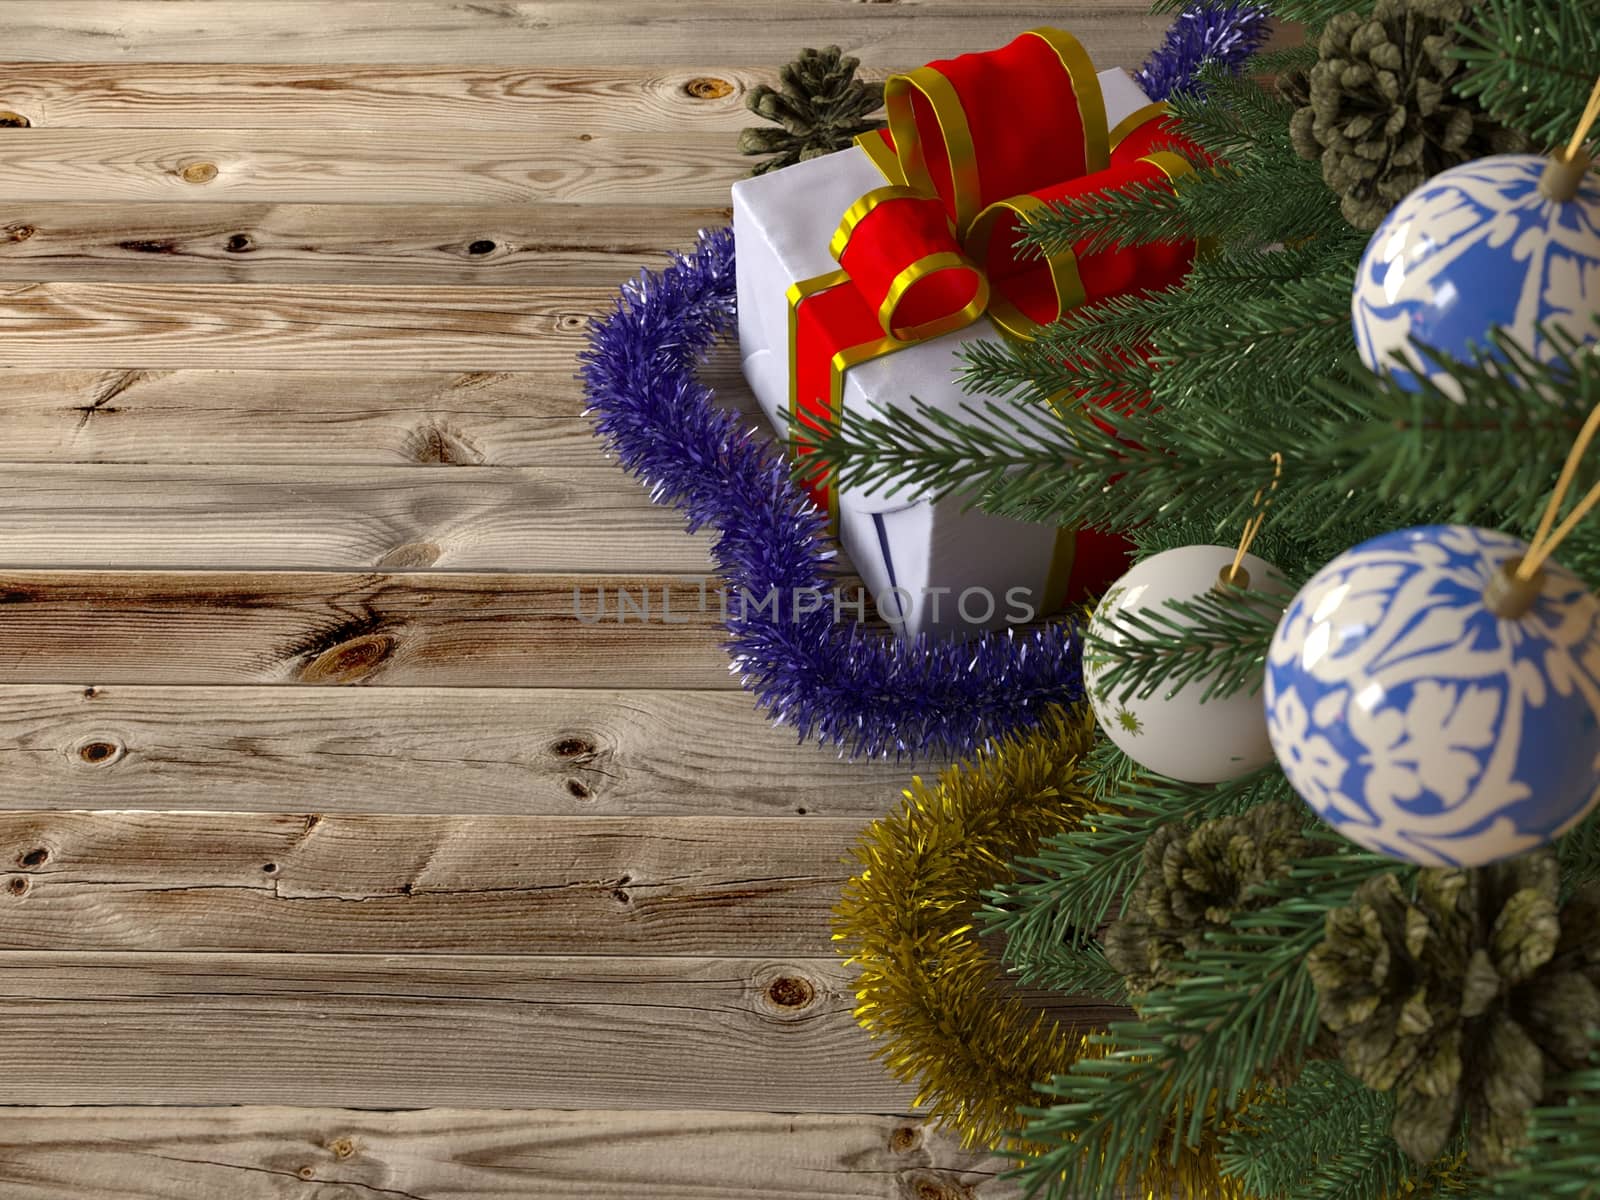 Christmas tree with gifts on wood texture background by denisgo